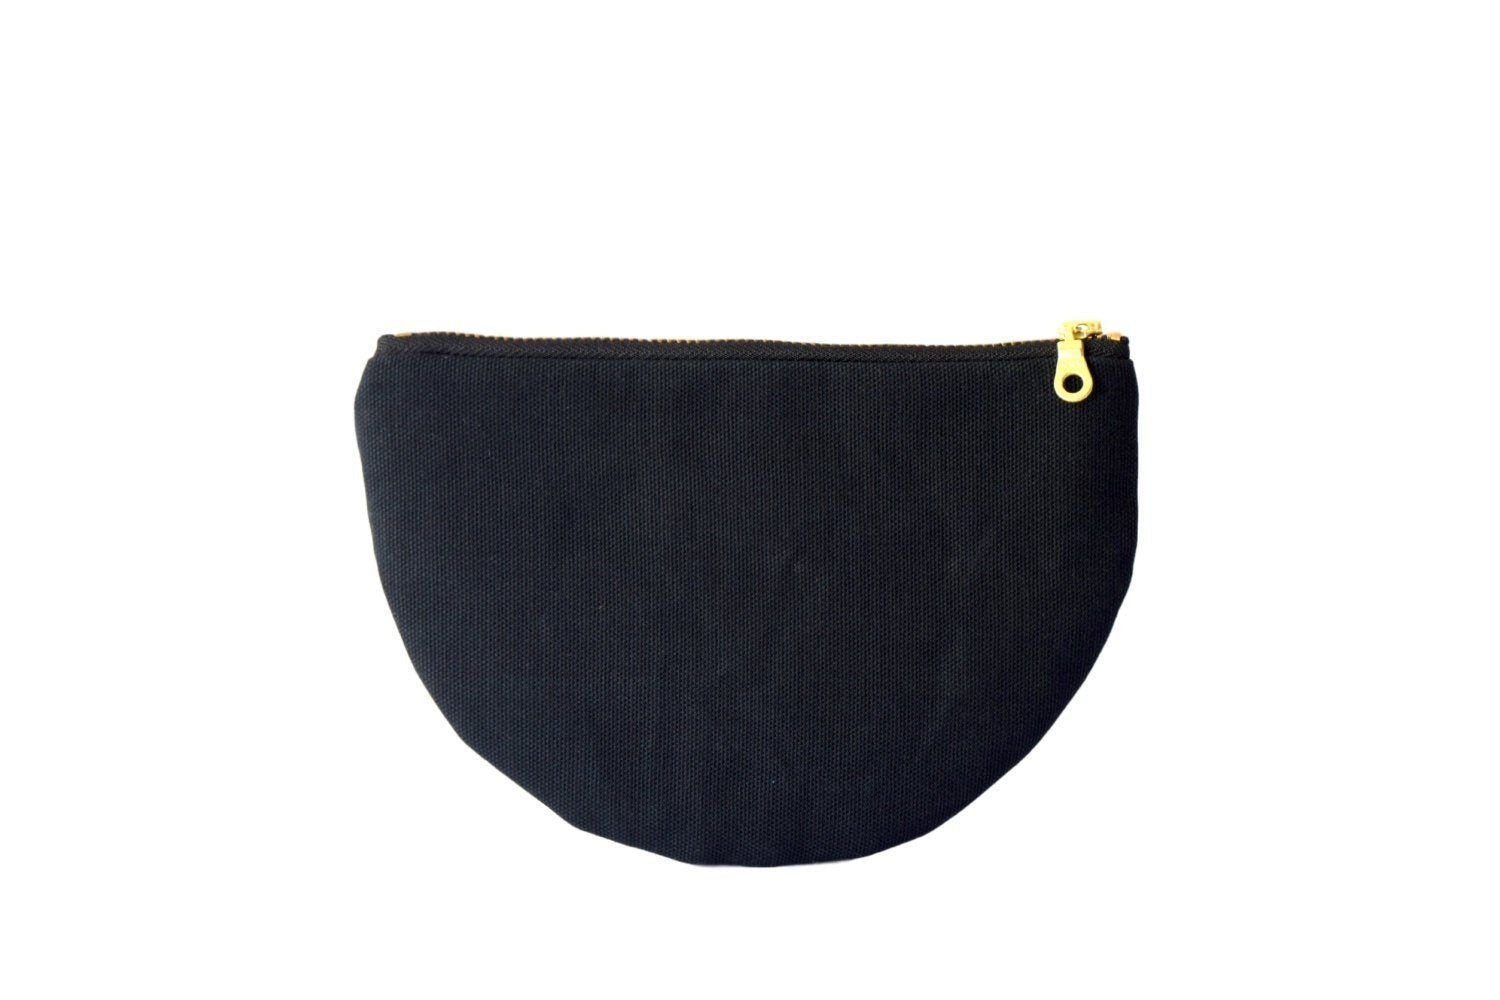 Paula Half-Moon Pouch In Black Waxed Canvascategory_Accessories from Tzoma - SHOPELEOS